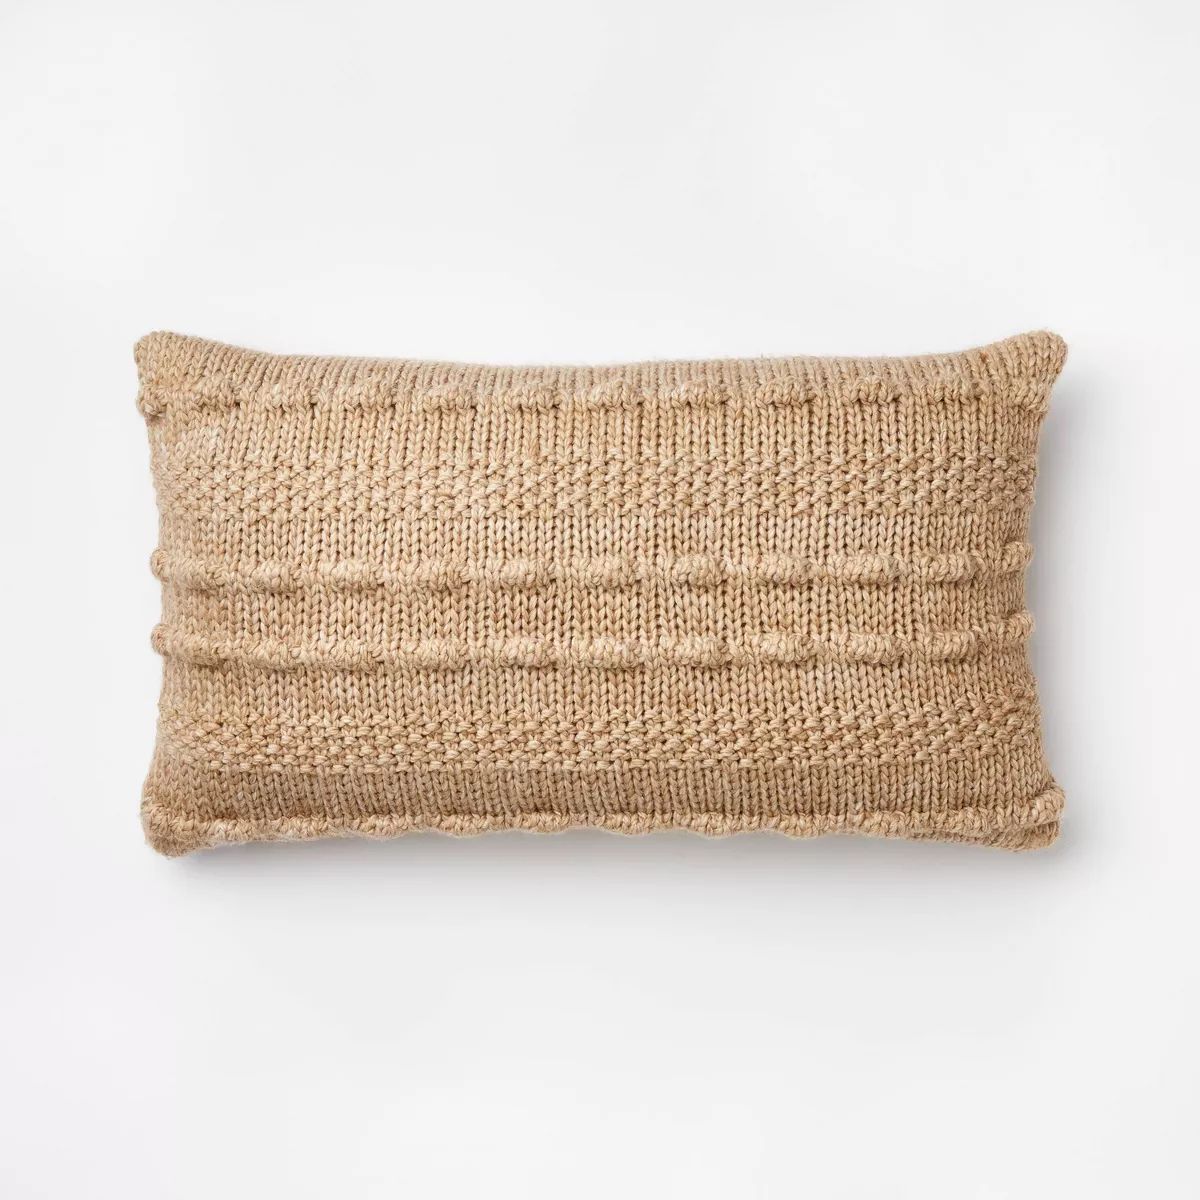 Oversized Bobble Knit Striped Lumbar Throw Pillow Beige - Threshold™ designed with Studio McGee | Target